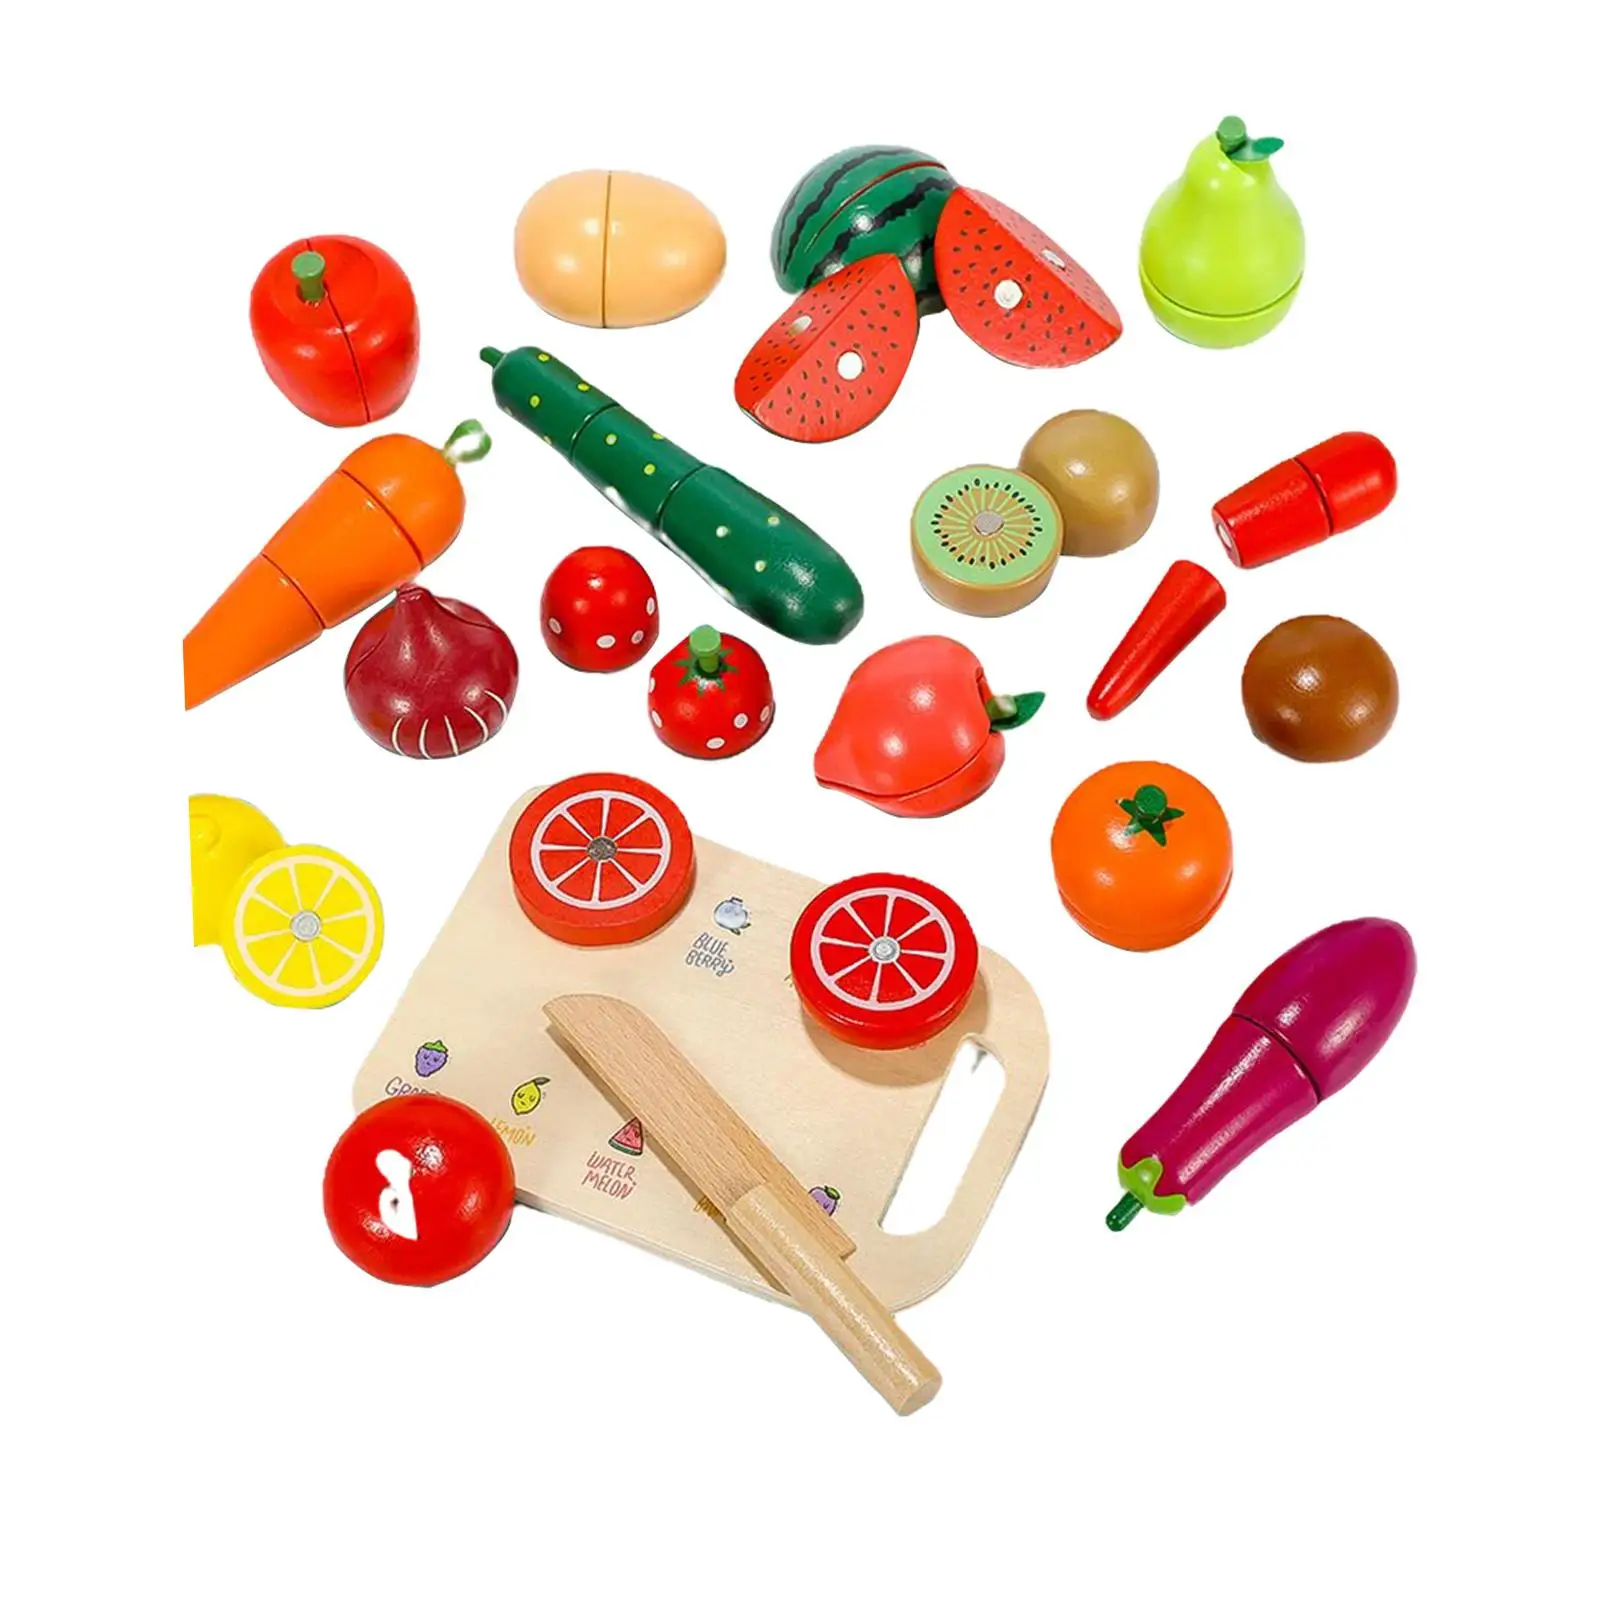 Toddlers Wooden Cutting Fruit and Vegetable Toy Early Development Colorful for 3, 4, 5, 6 Year Old Easily Store Gift Educational